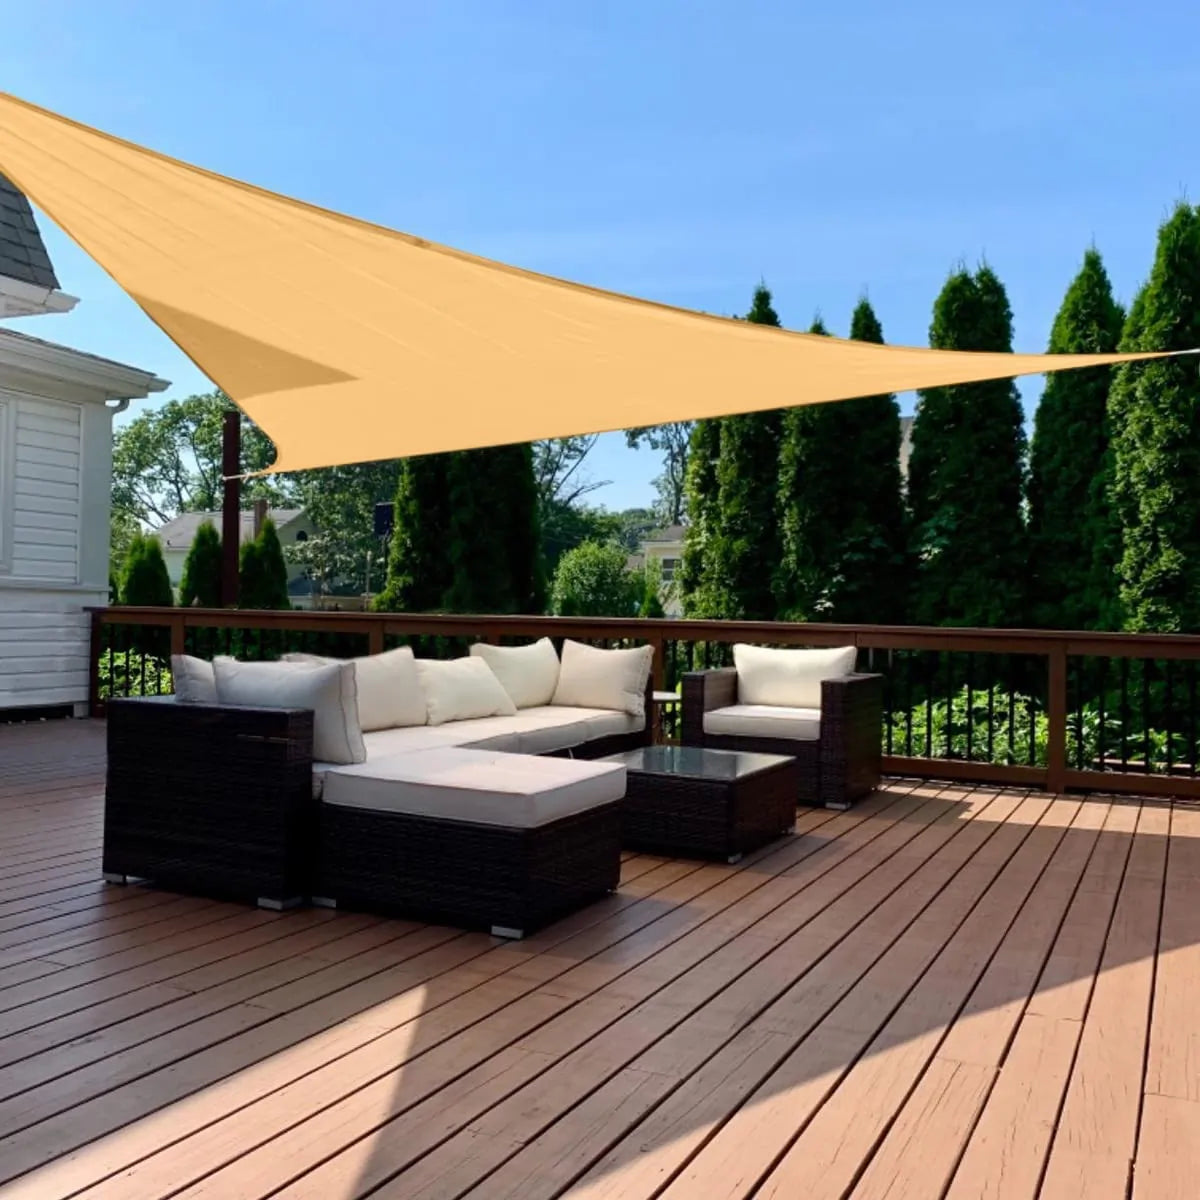 Quictent Triangle Fire-Retardant Shade Sail, Triangle Sail for Outdoor